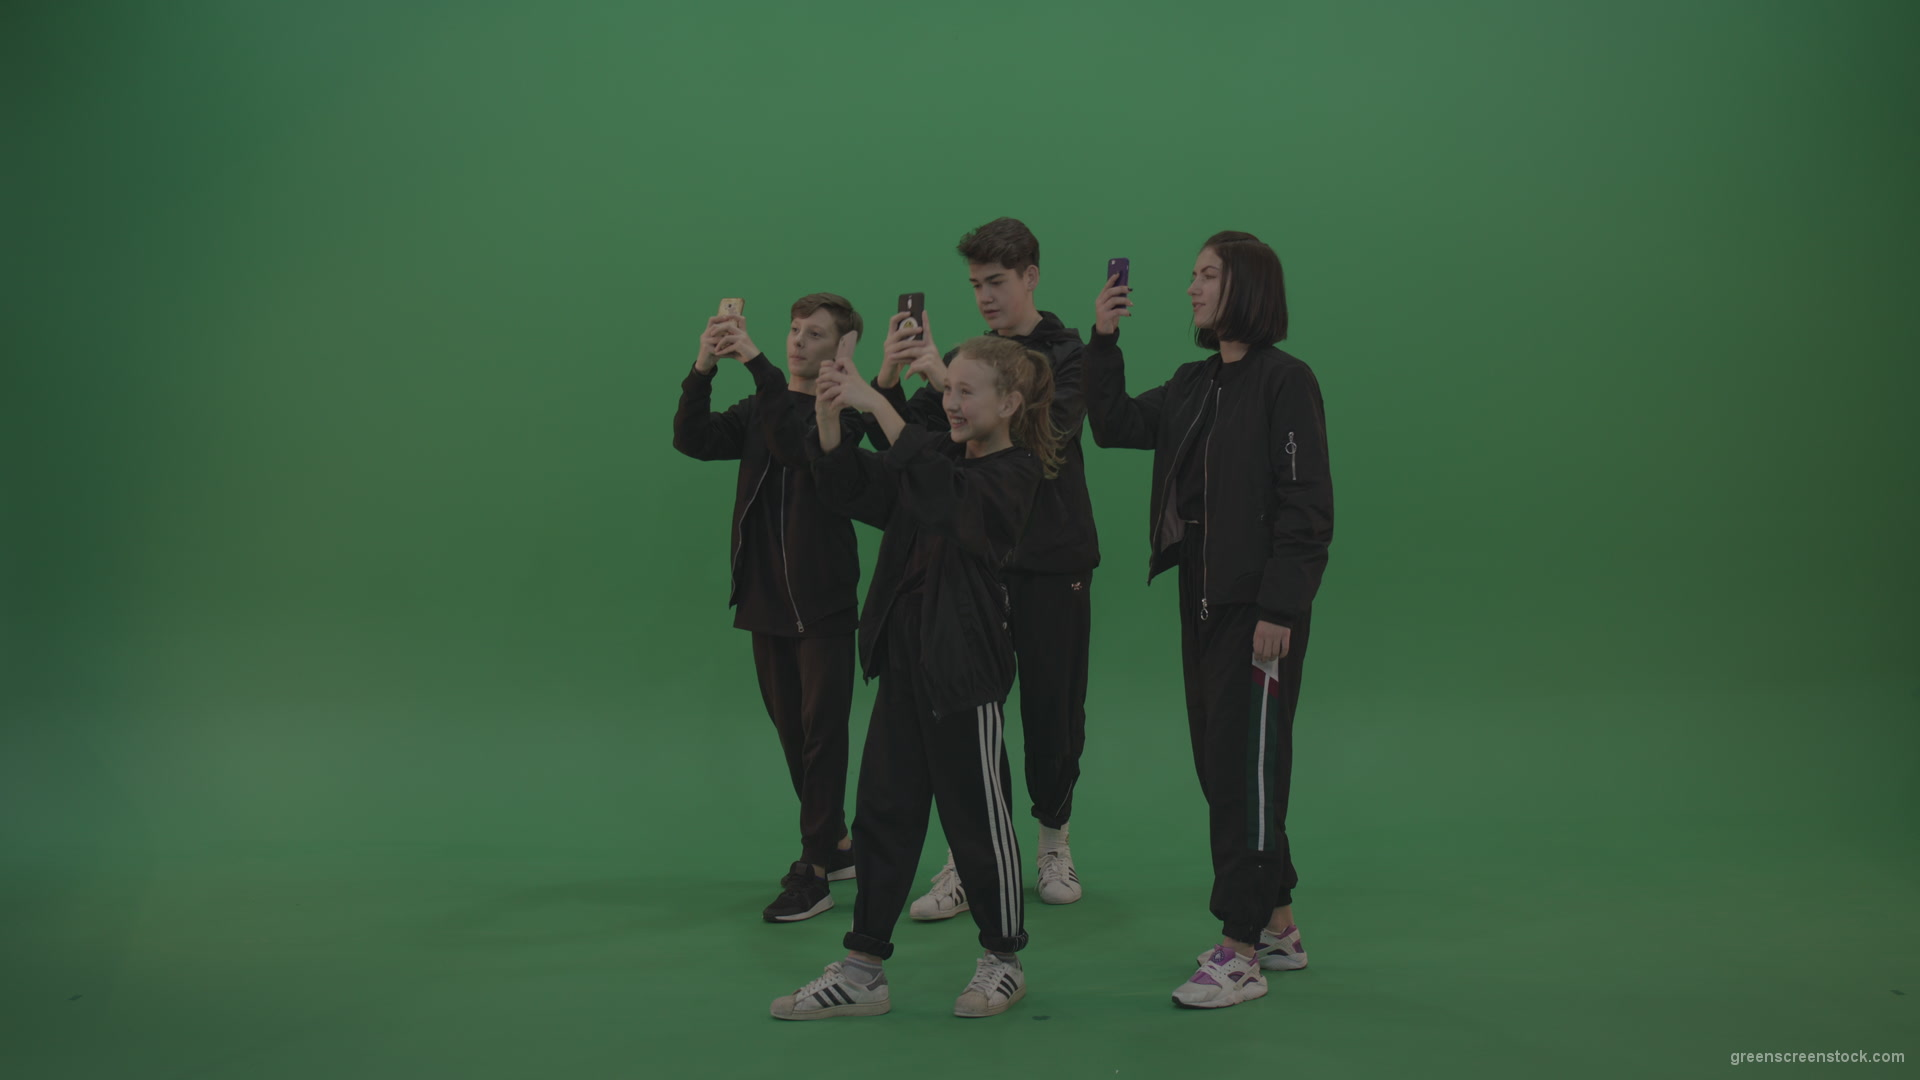 Four-kids-in-black-wears-take-pictures-over-chromakey-background_002 Green Screen Stock